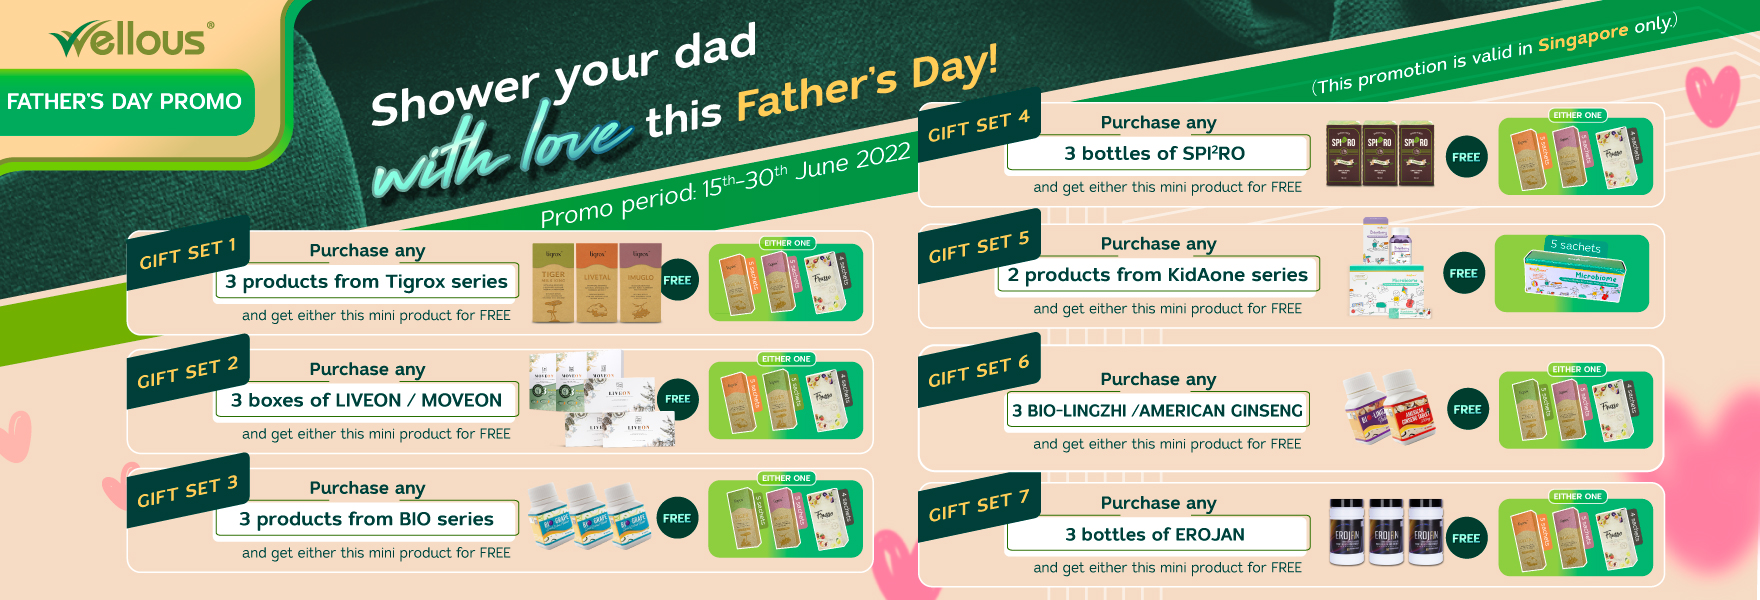 Wellous Singapore Father day JUN 2022 promotion